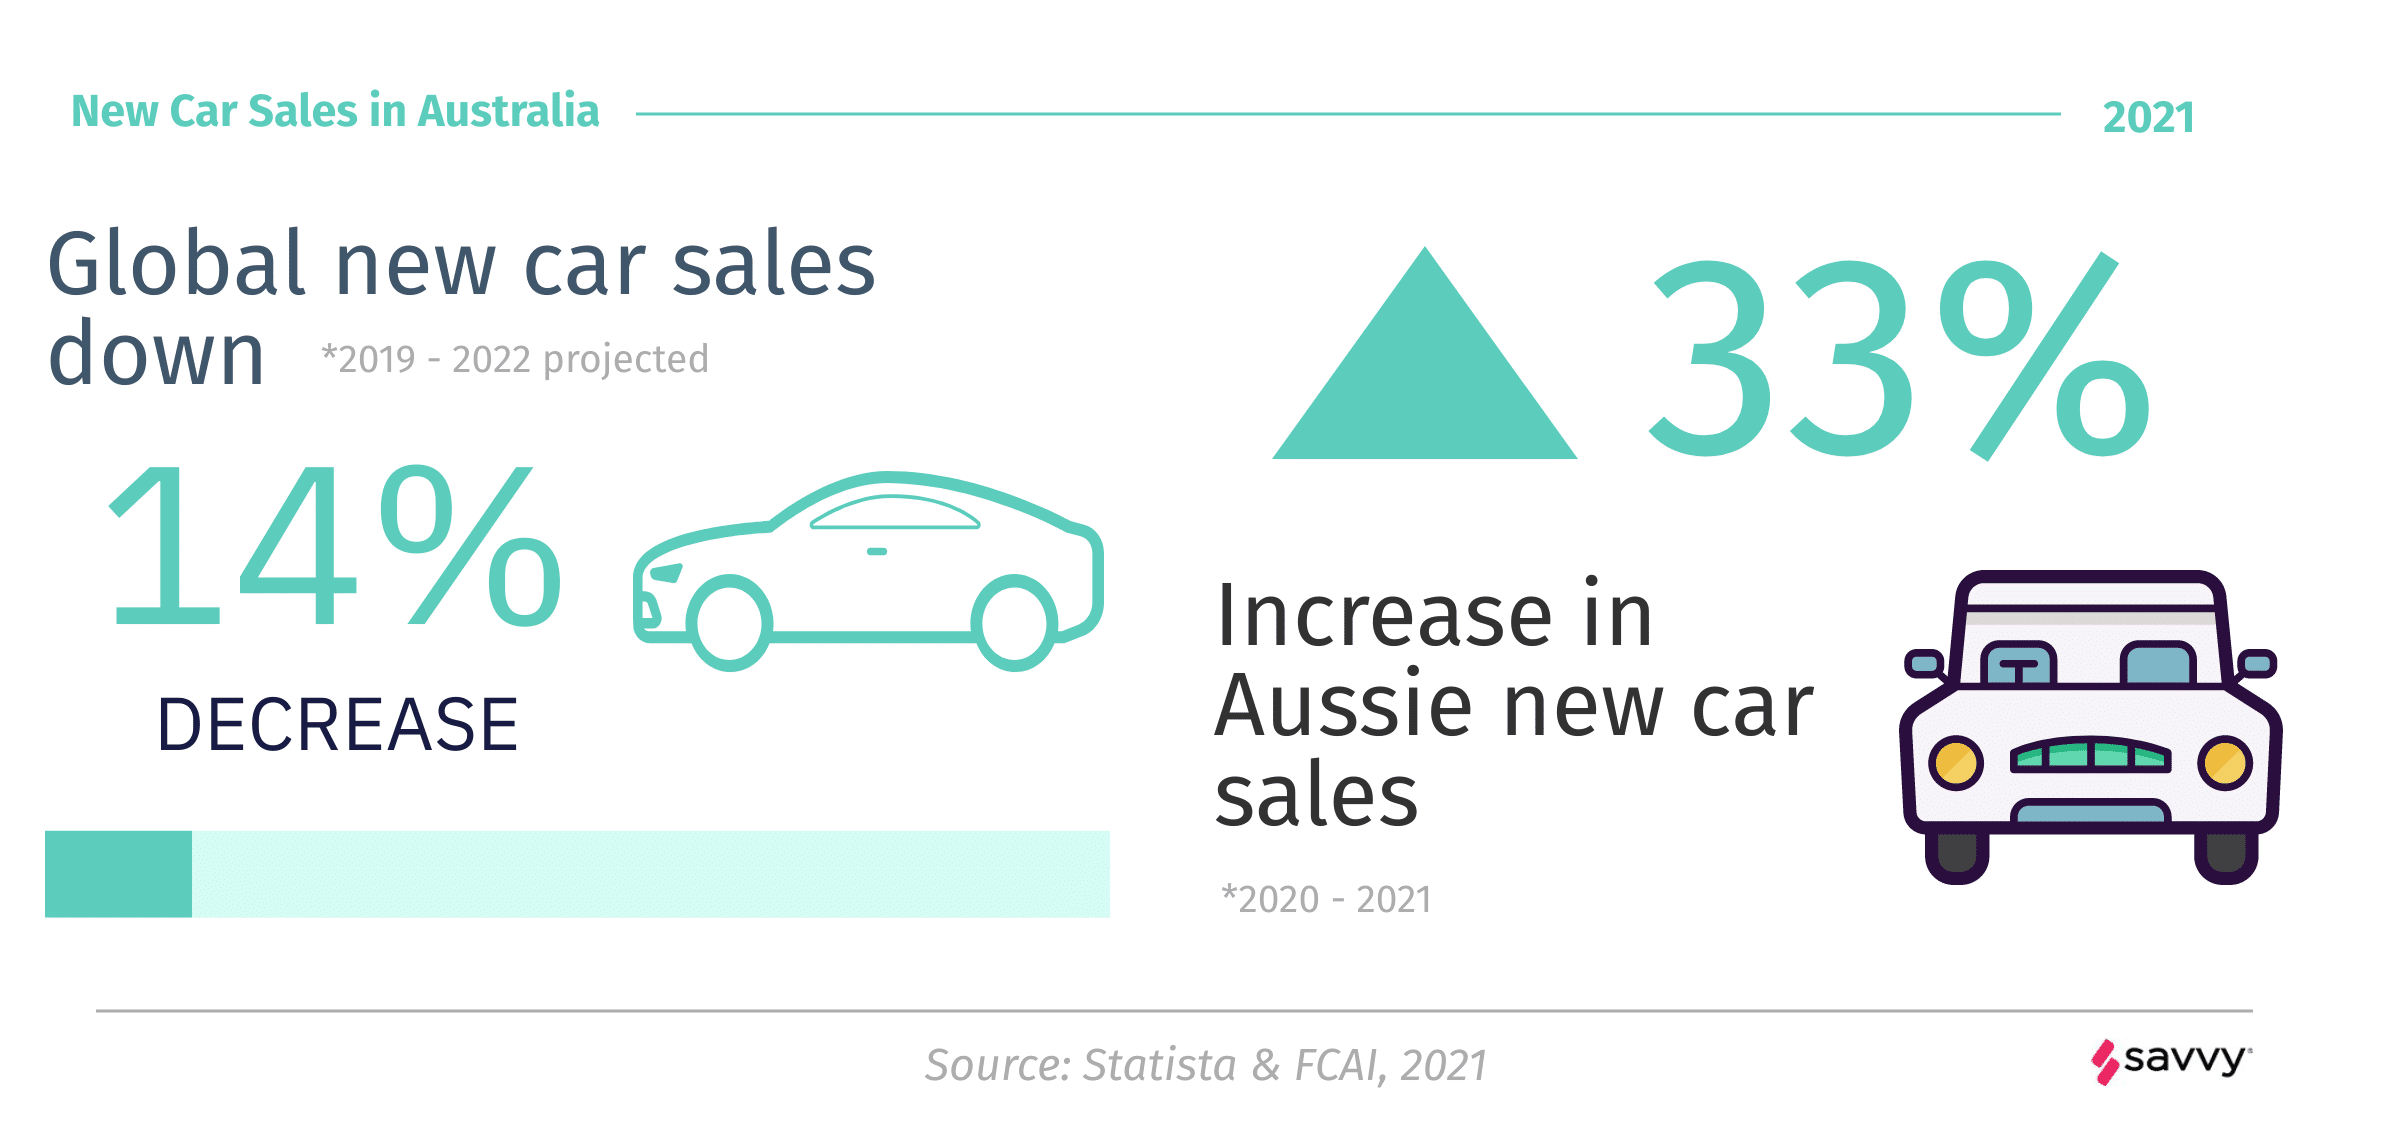 33% Increase in Aussie New Car Sales in 2021